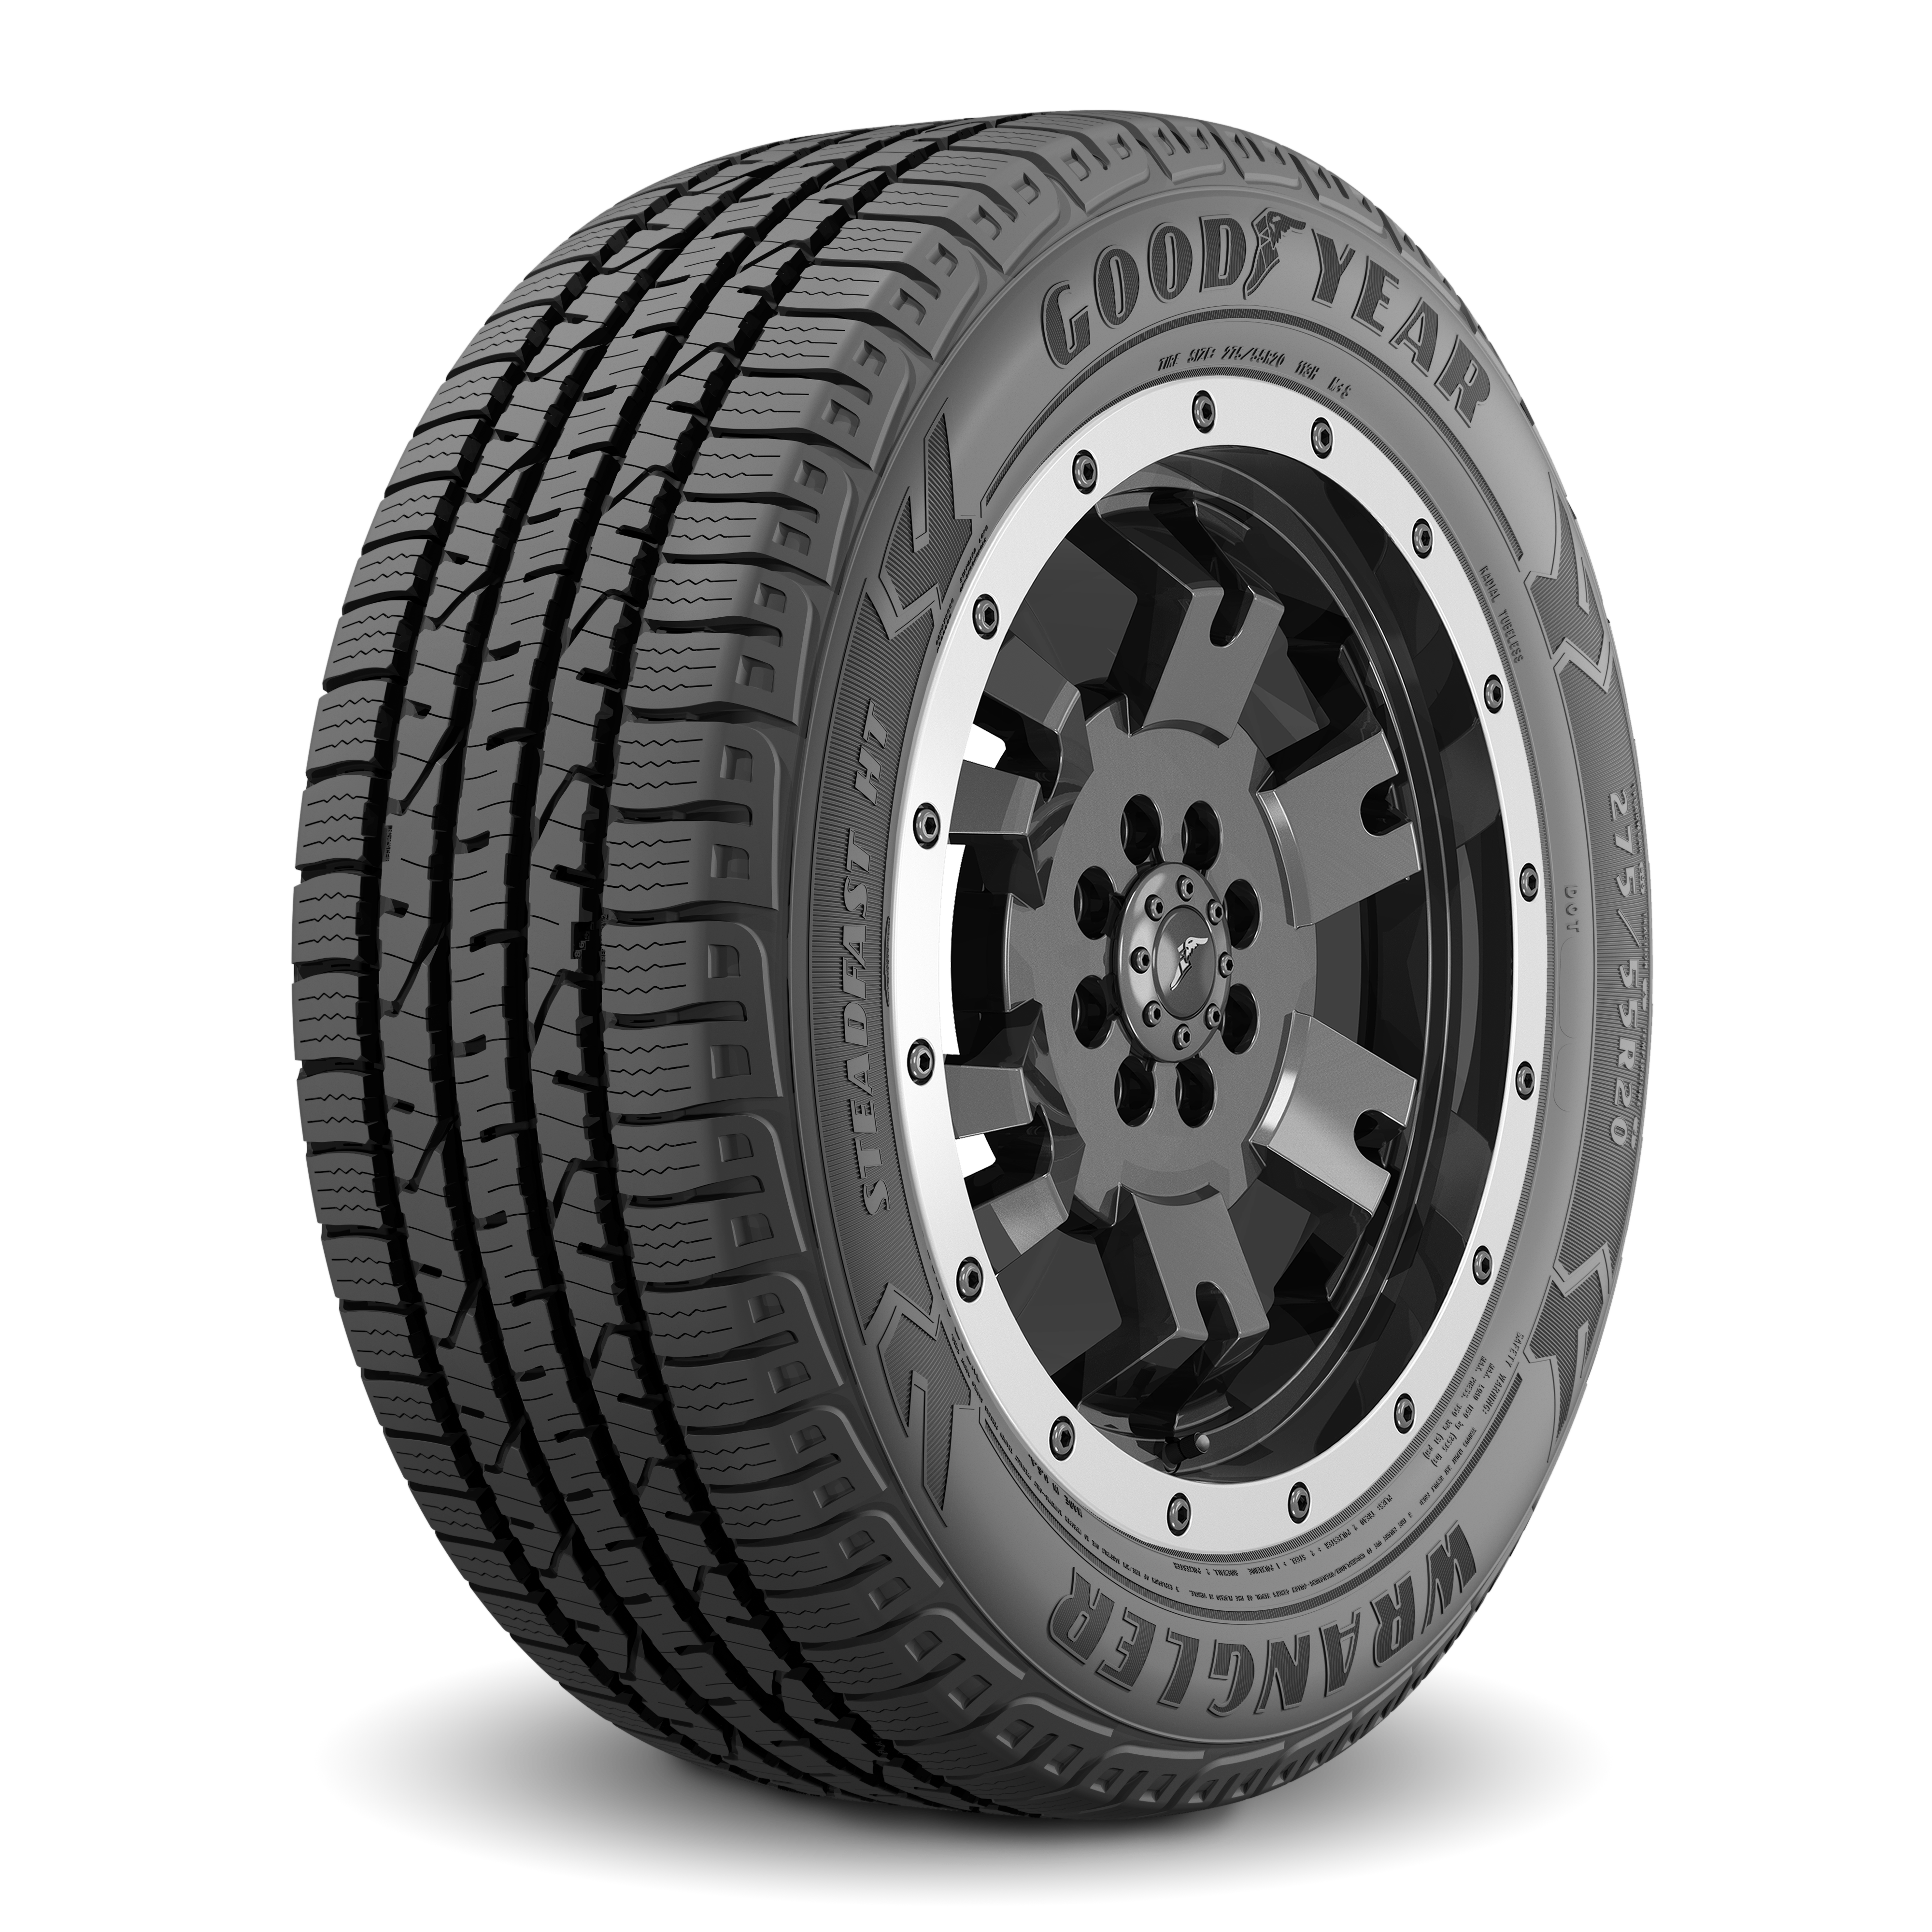 Goodyear Wrangler Steadfast HT - Tire Reviews and Tests